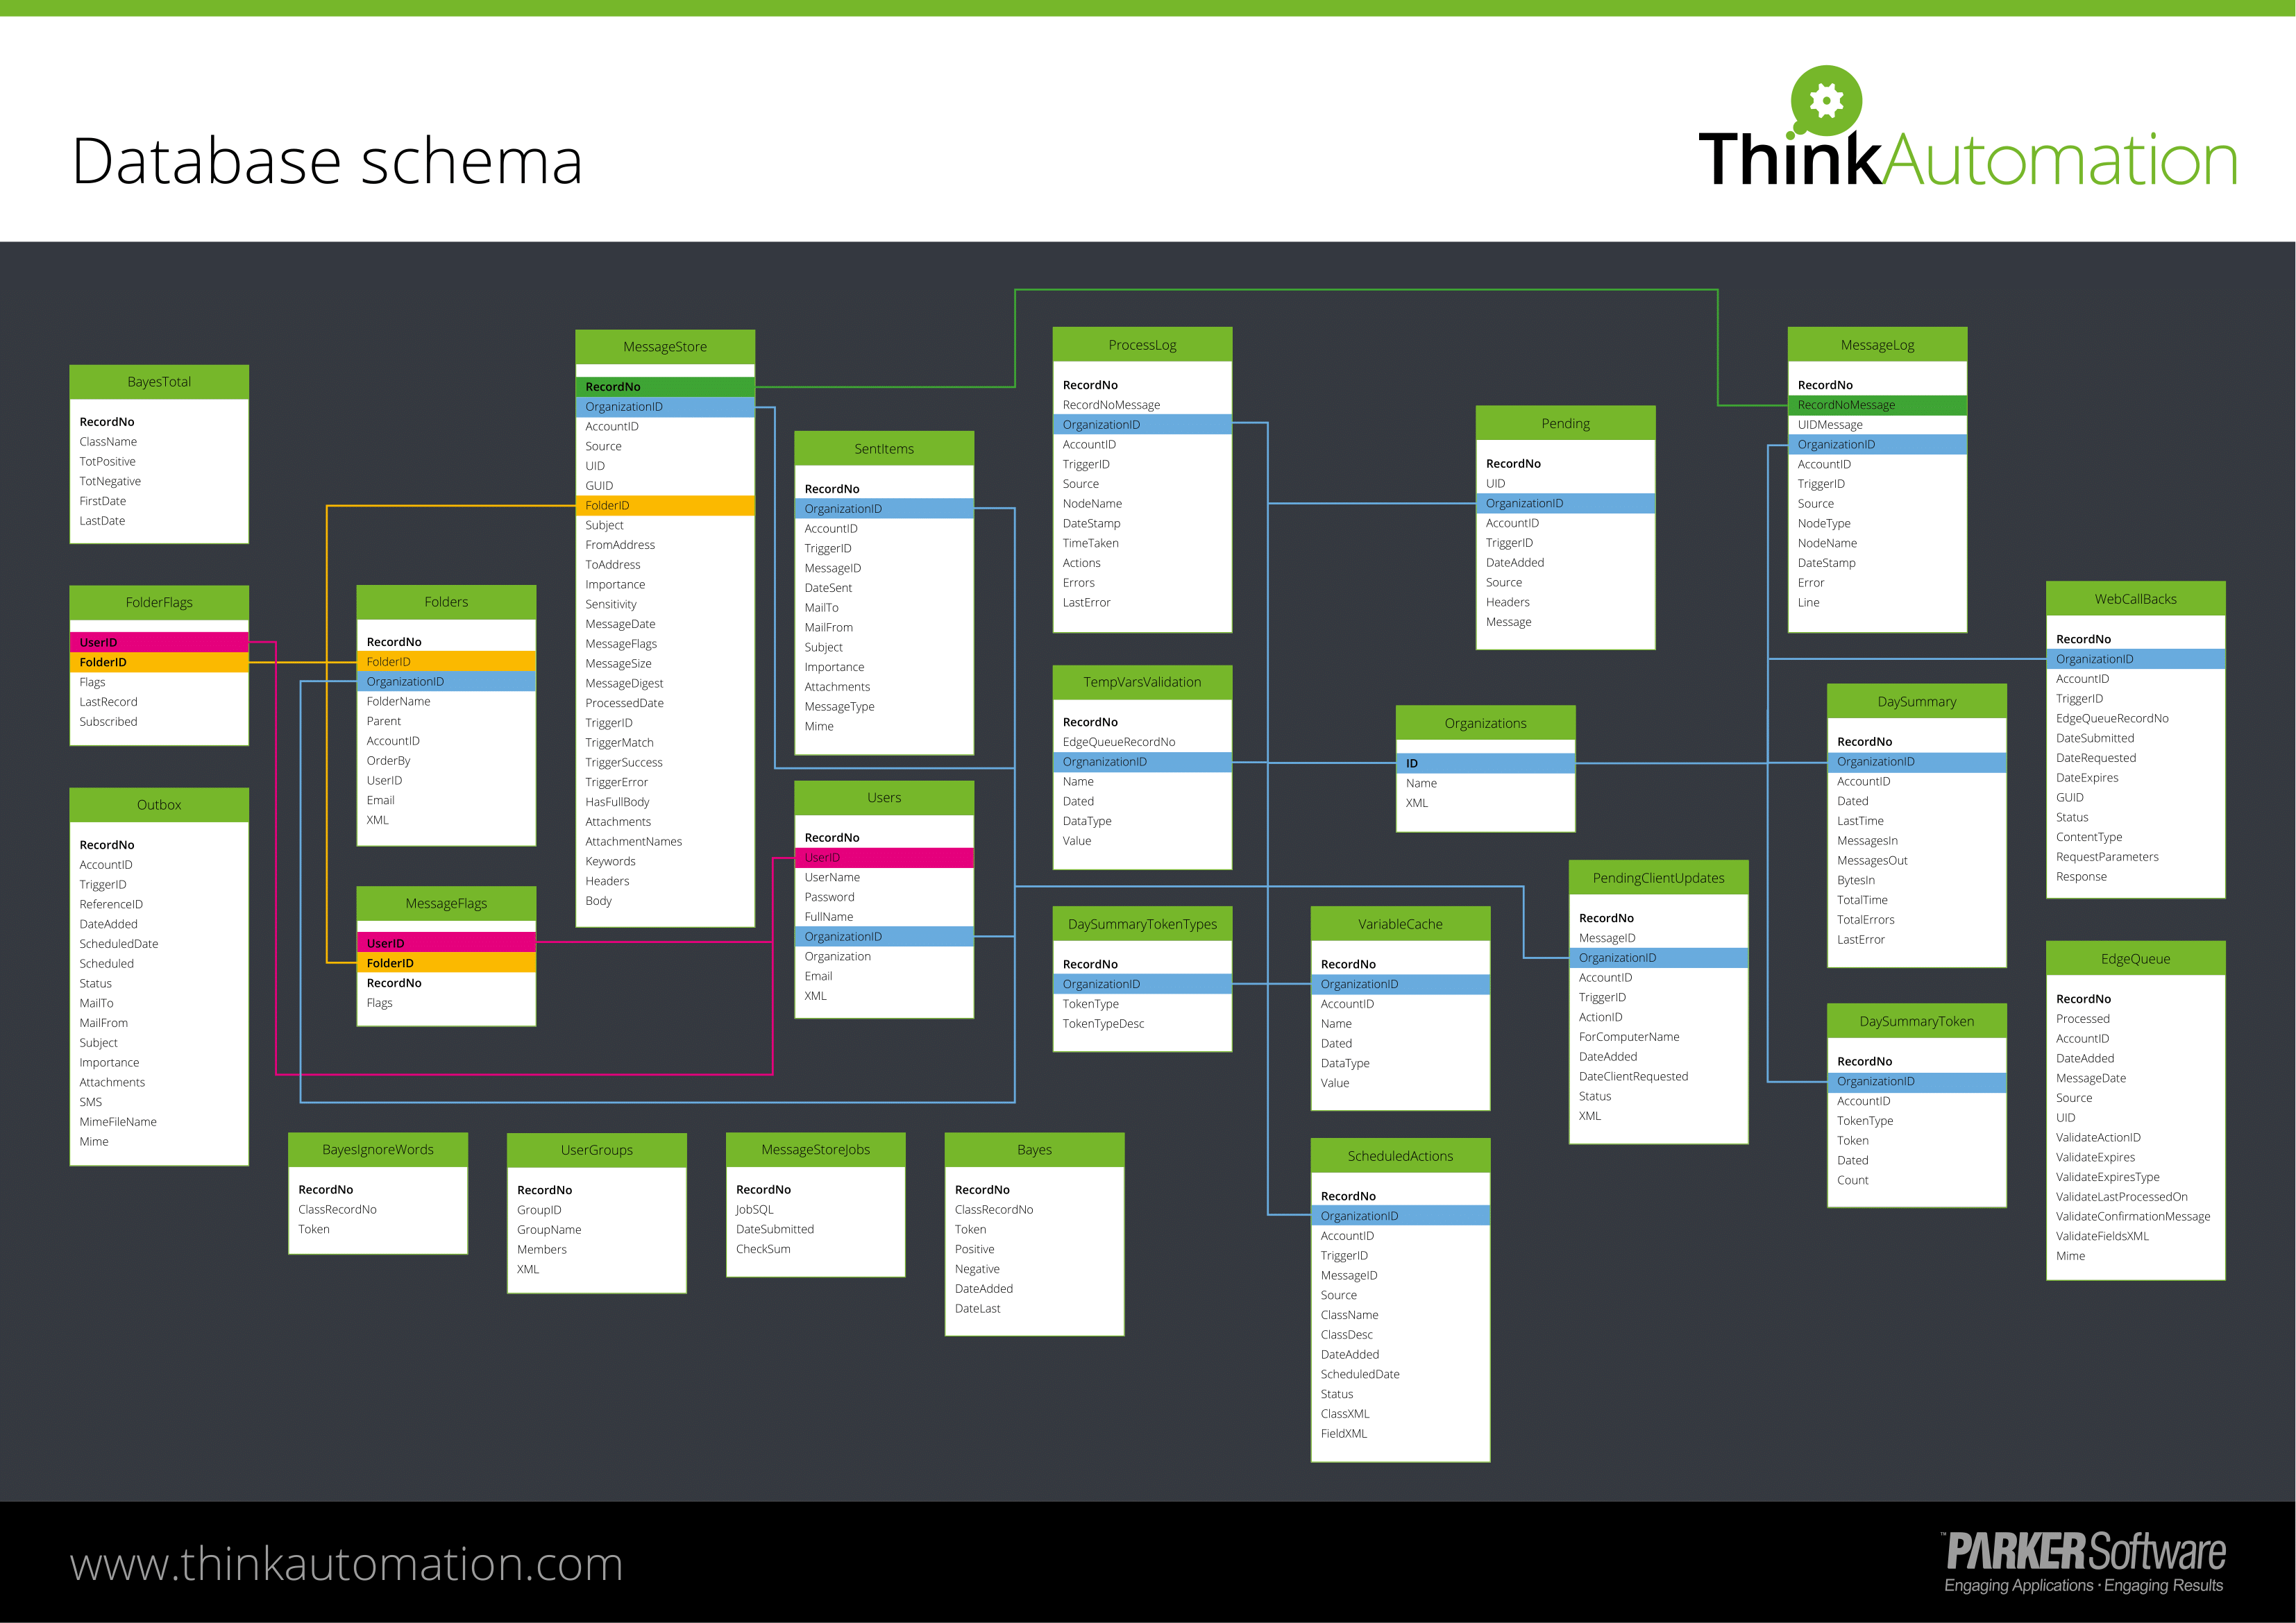 Info graphic - Overview: the ThinkAutomation database schema